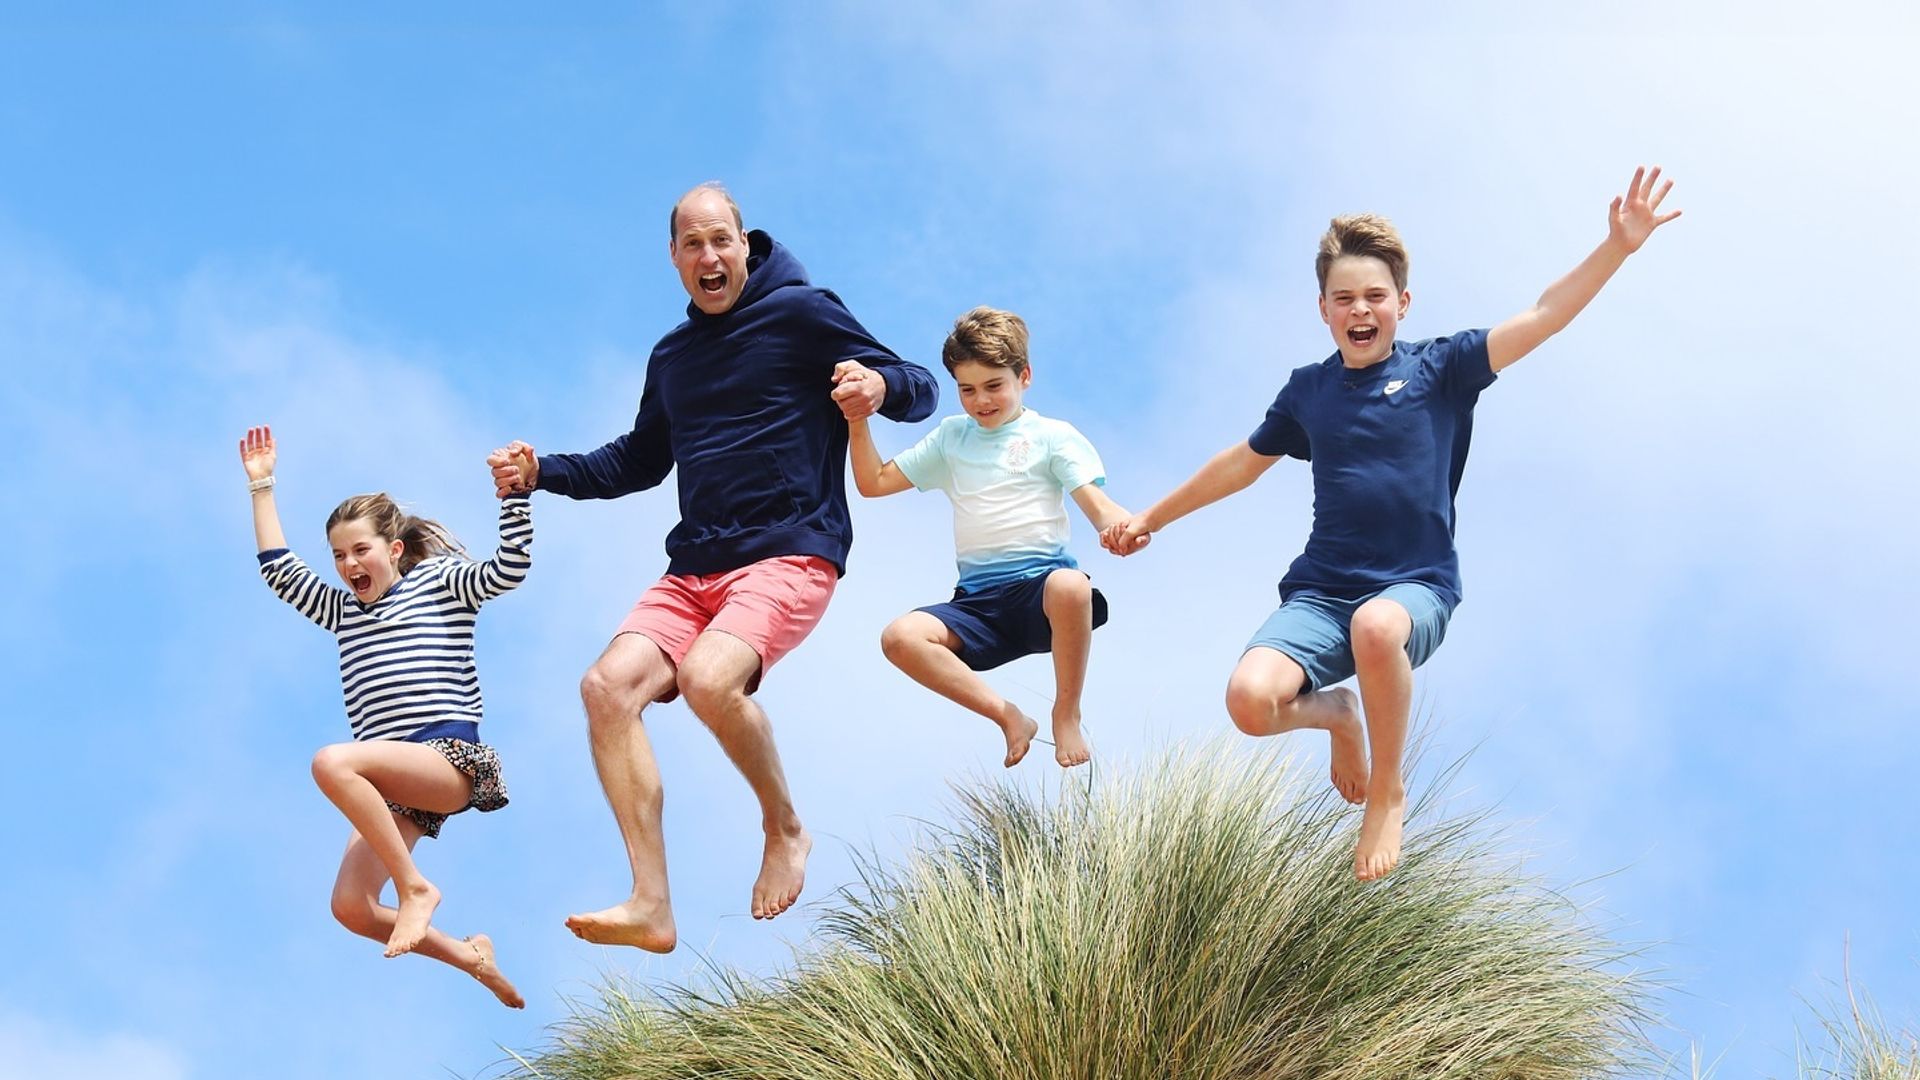 Kate Middleton shares most fun beach photo of her children yet to mark Prince William's 42nd birthday | HELLO!